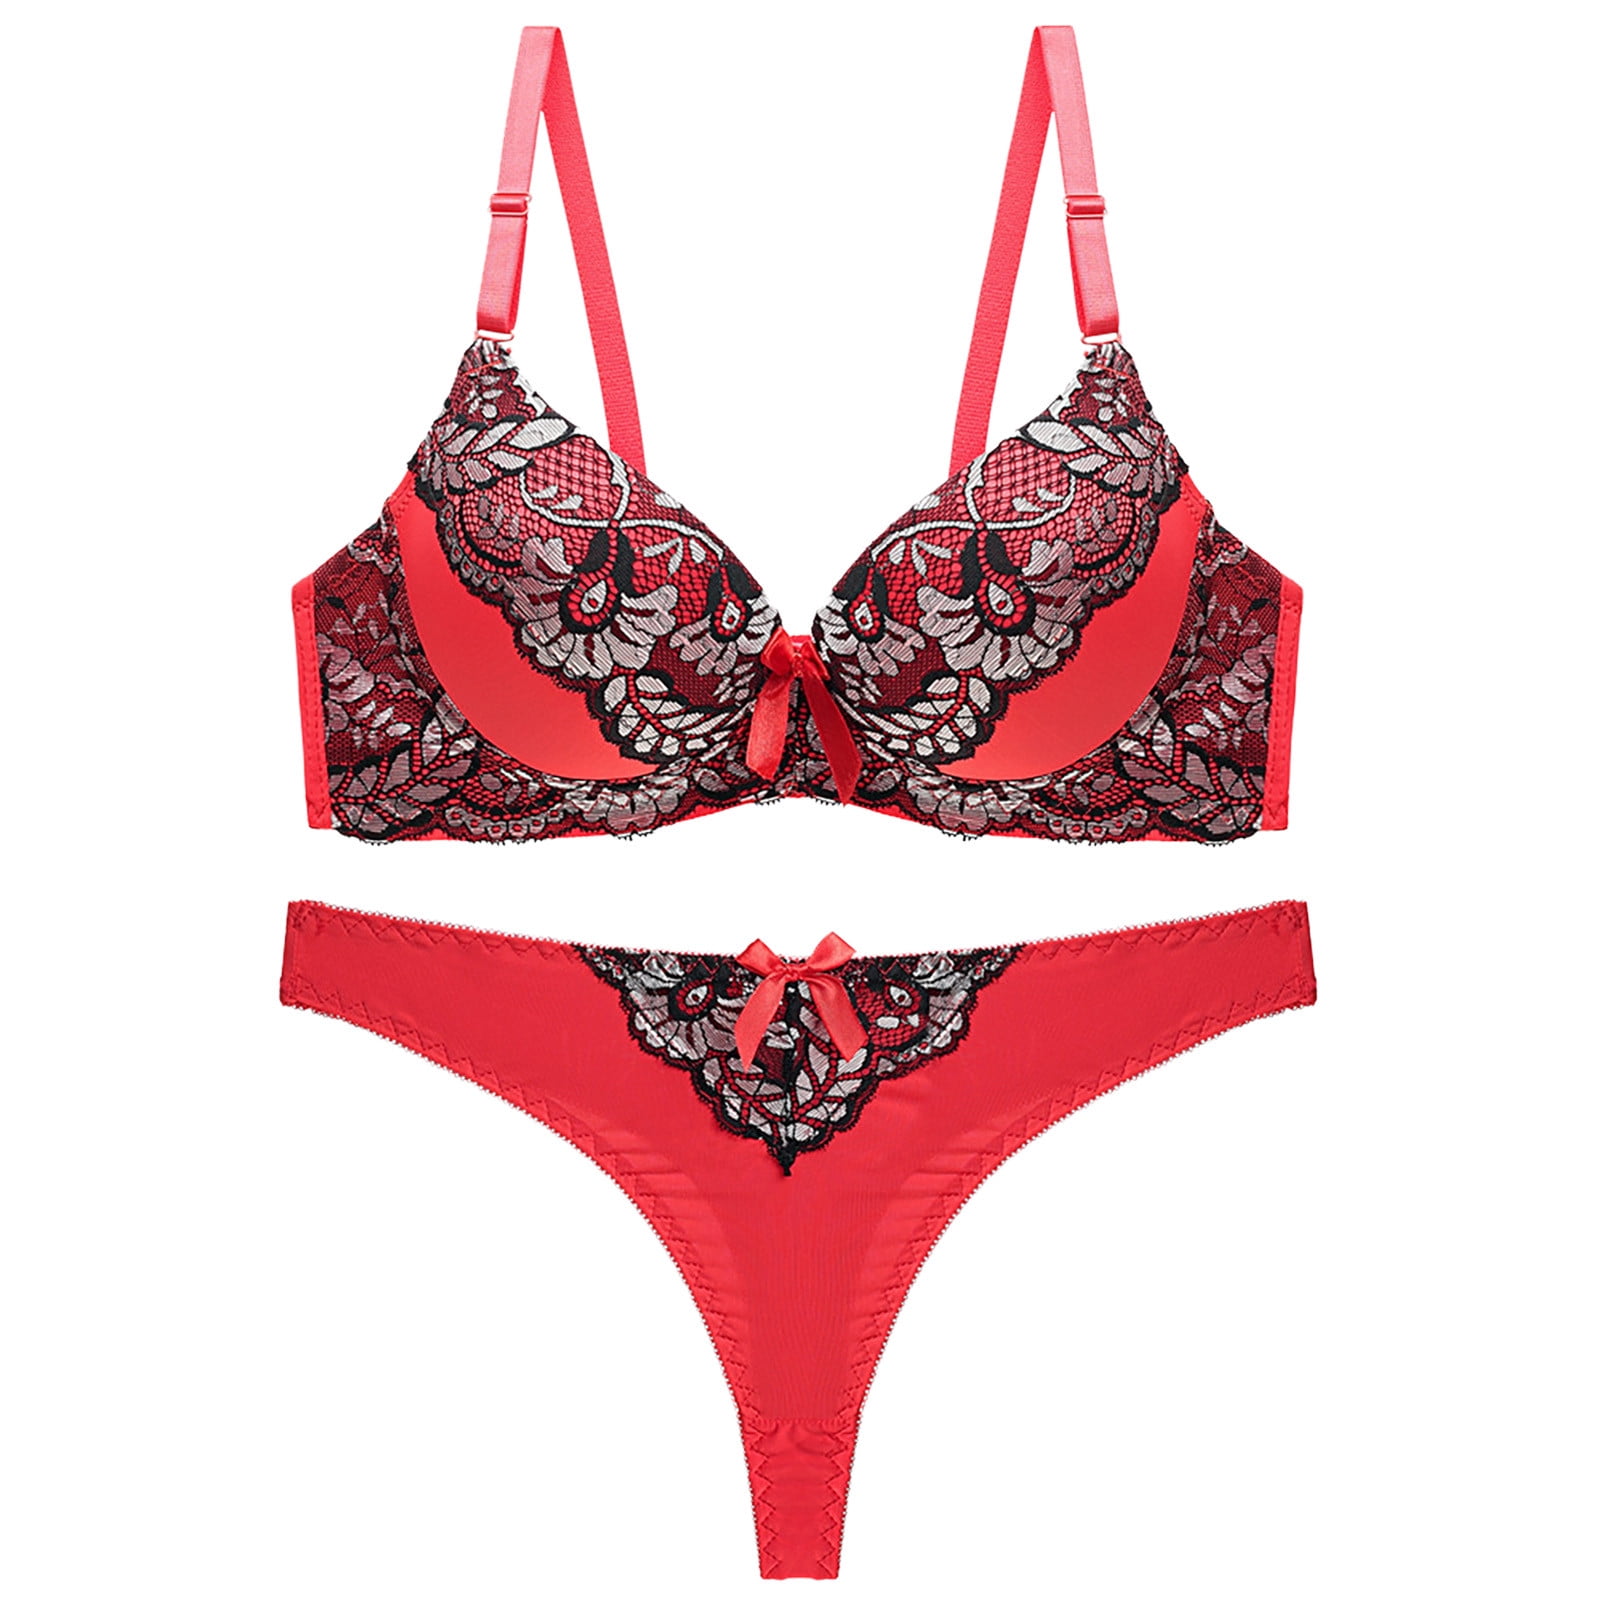 Womens Lace Cotton Embroidered Push Up Bra And Panty Set, Plus Size Lingerie  Set Q0705 From Sihuai03, $10.64